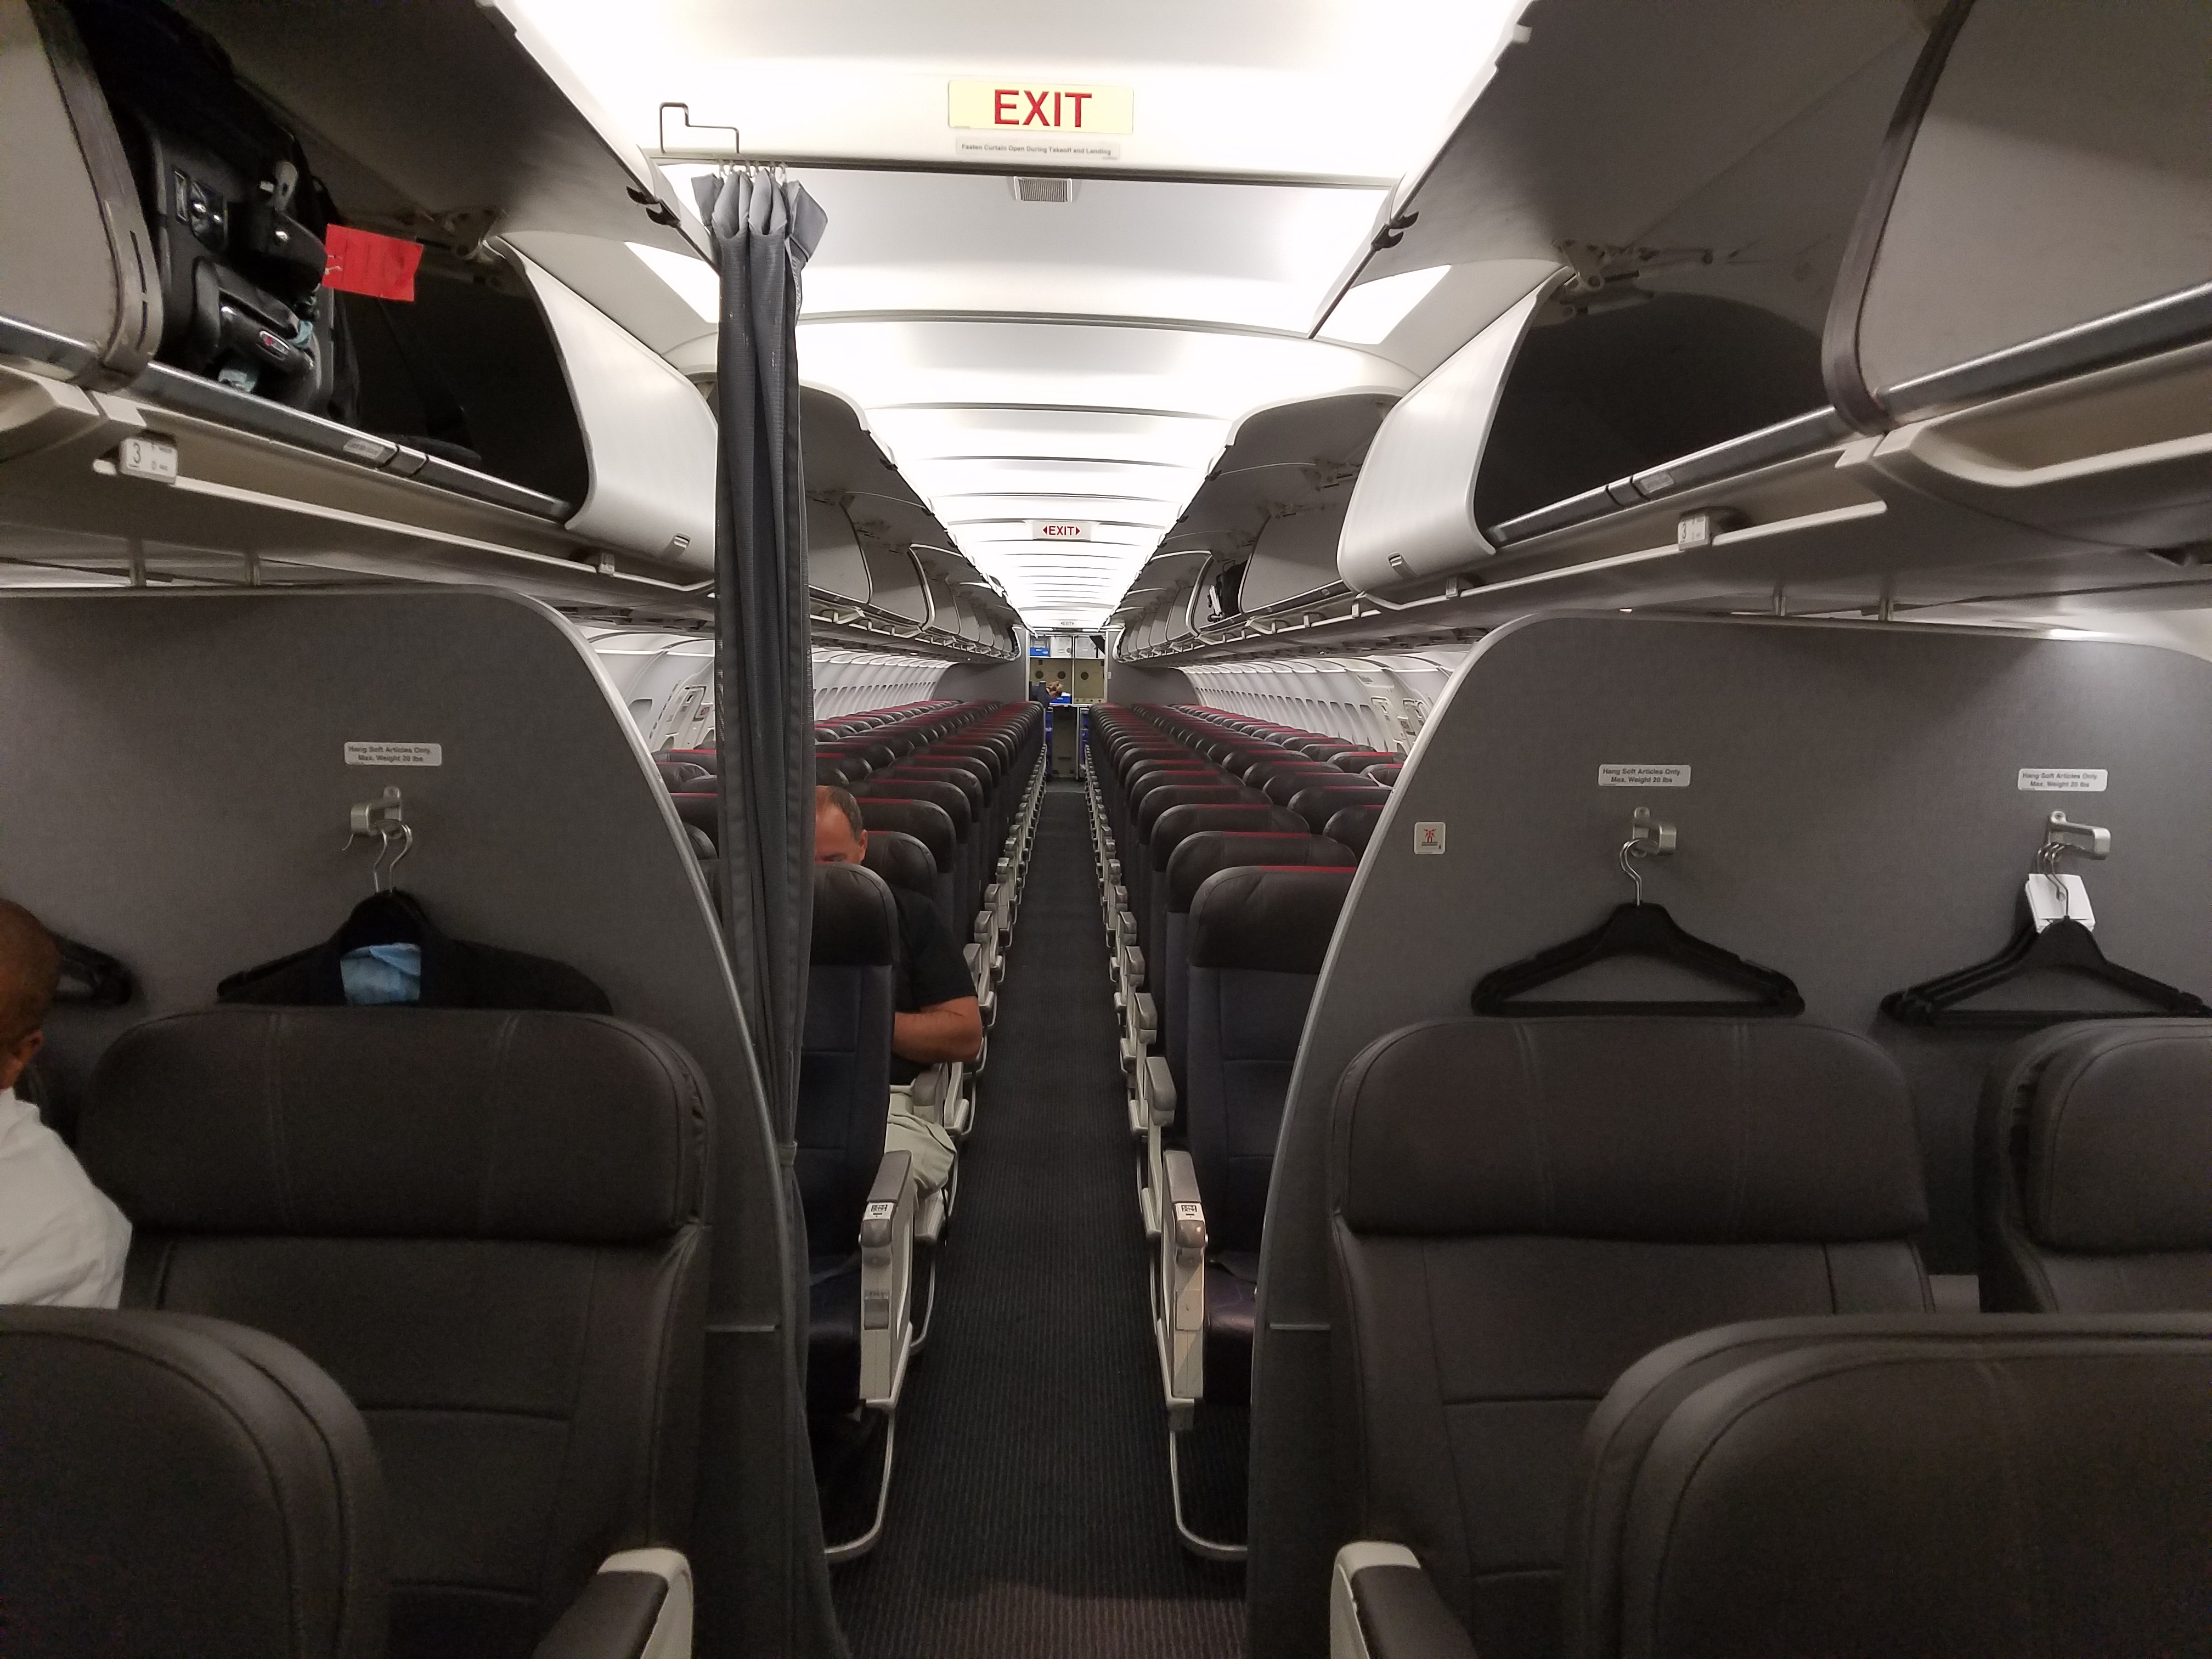 A New US Airways Interior I've Never Seen Before - Refreshed Seat ...